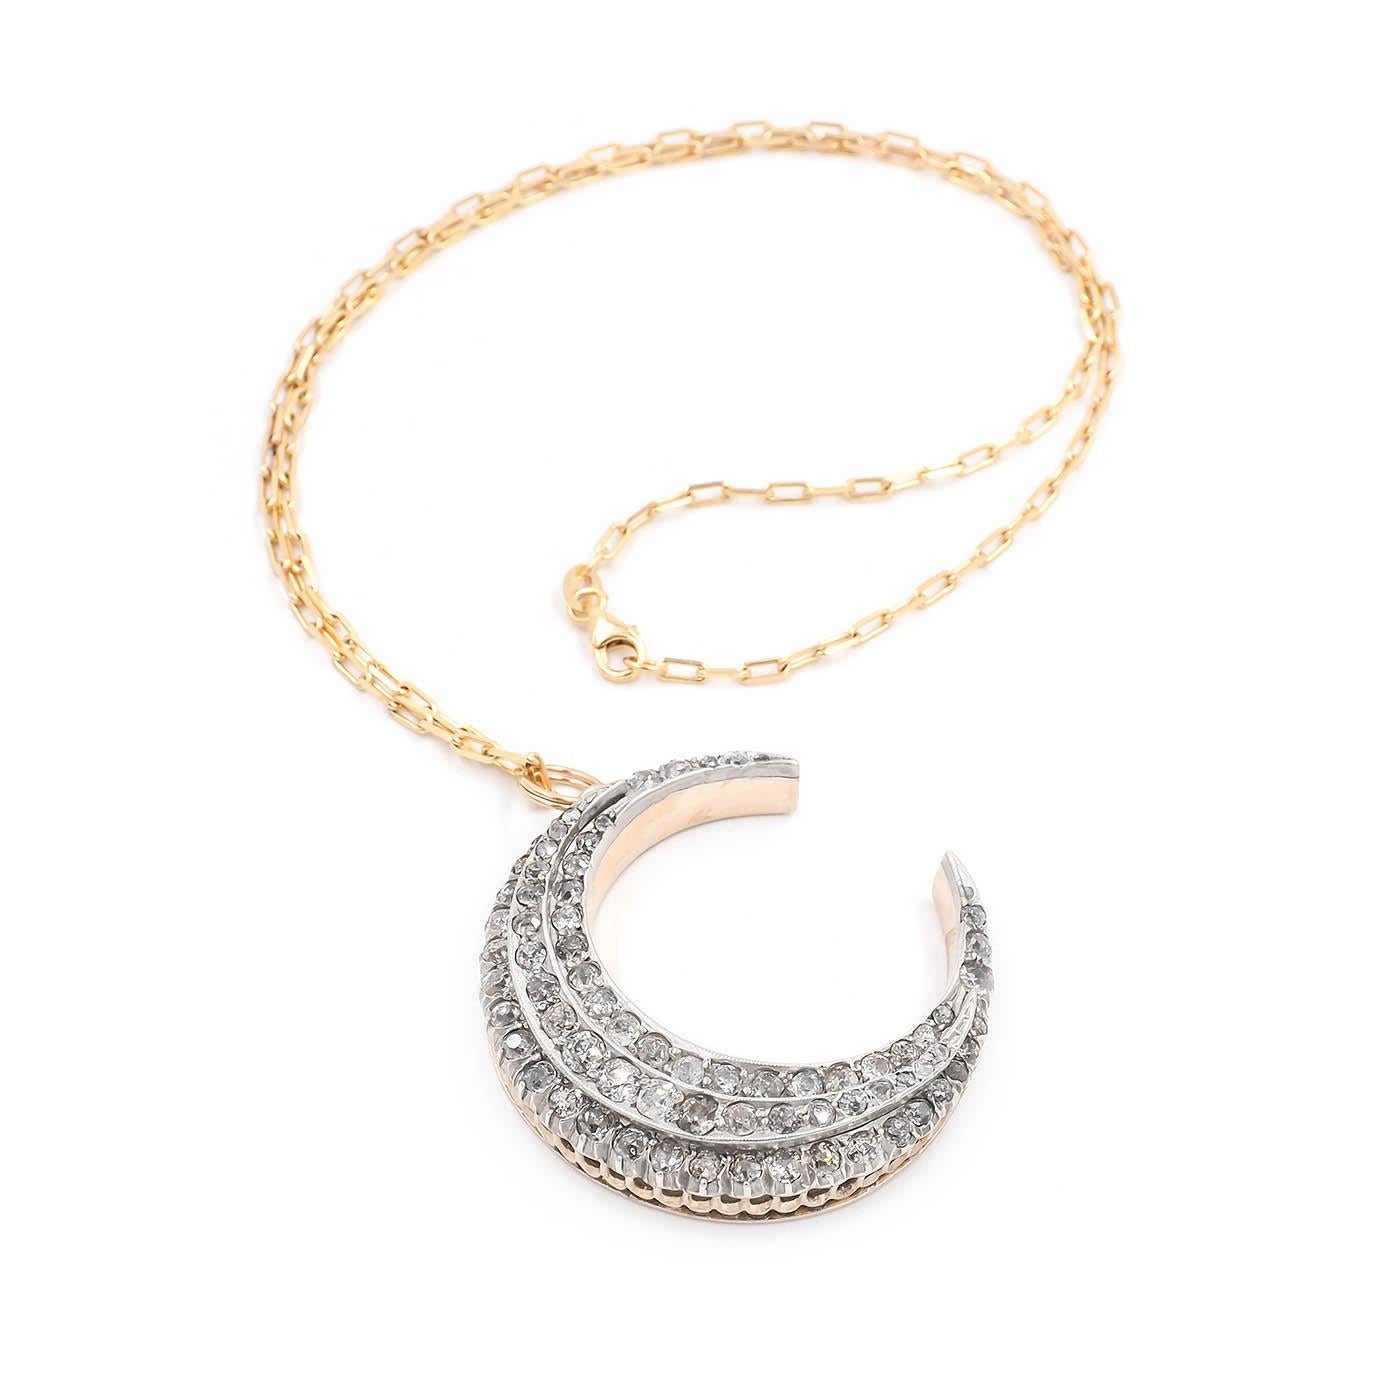 Victorian era 3.70 Ctw. Old Cut Diamond Crescent Moon Pendant Necklace composed of 14k Yellow Gold and silver. Set with 74 Old Cut diamonds, a combination of Old Mine Cut and Rose Cut diamonds weighing 3.70 carats in total. Converted to a pendant